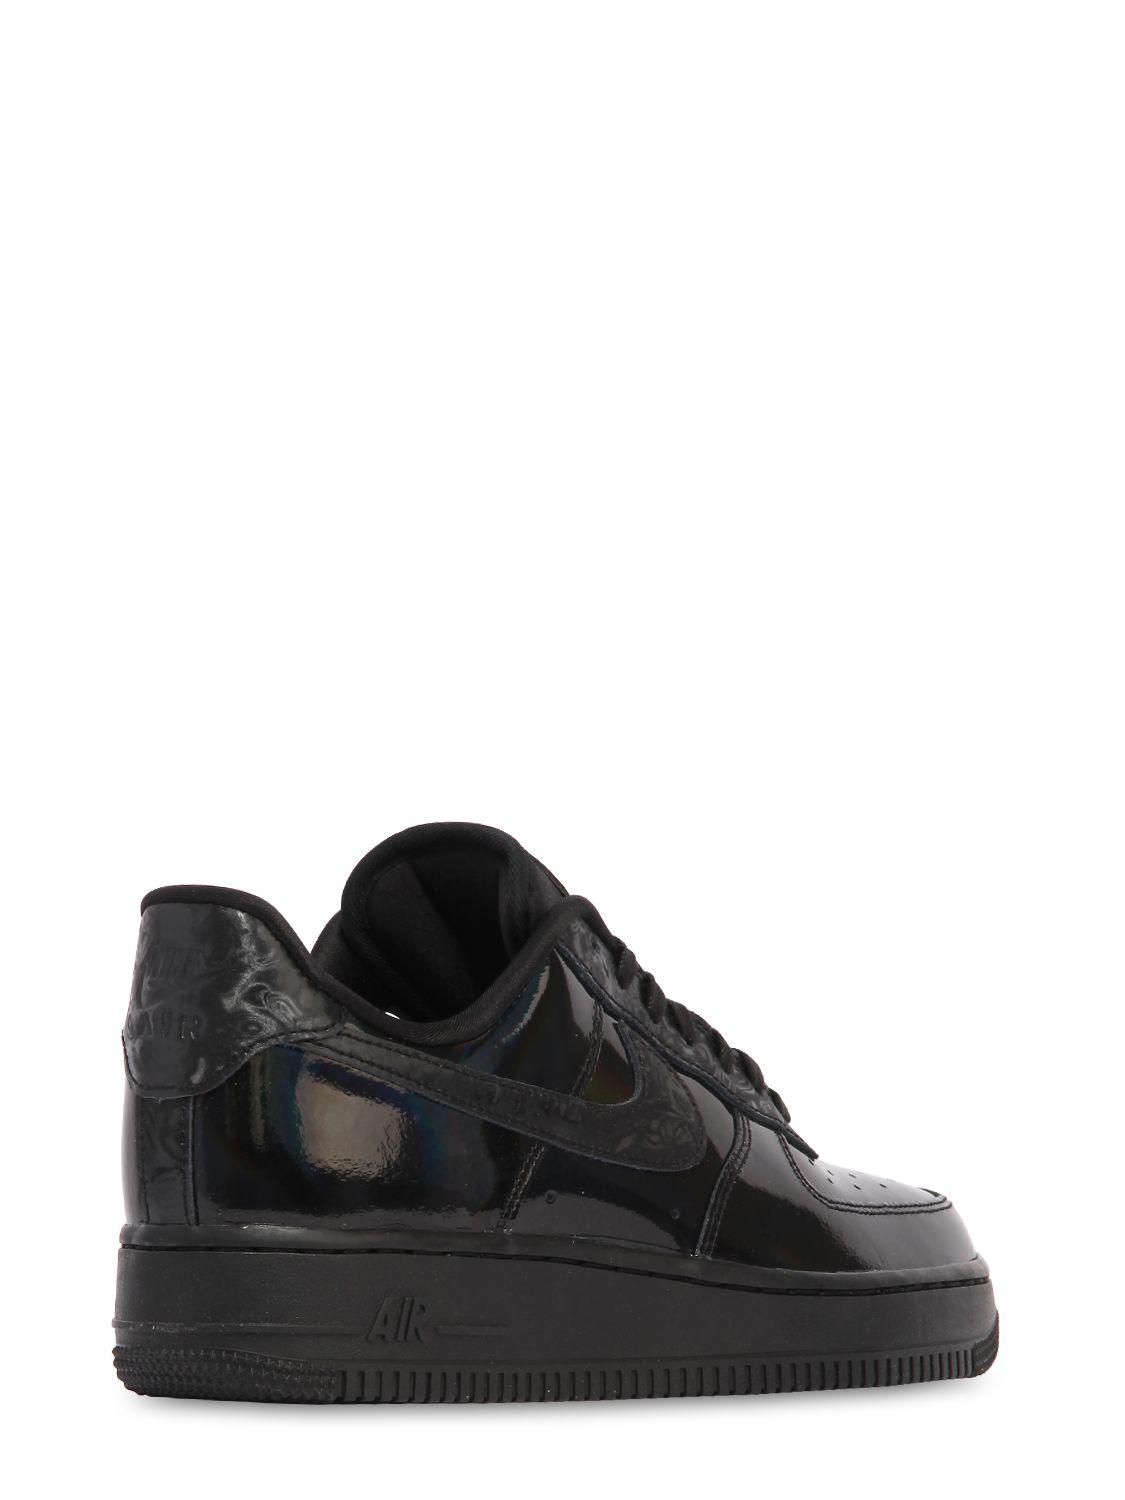 Nike Leather Air Force 1 07 Lux Iridescent Sneakers in Black | Lyst